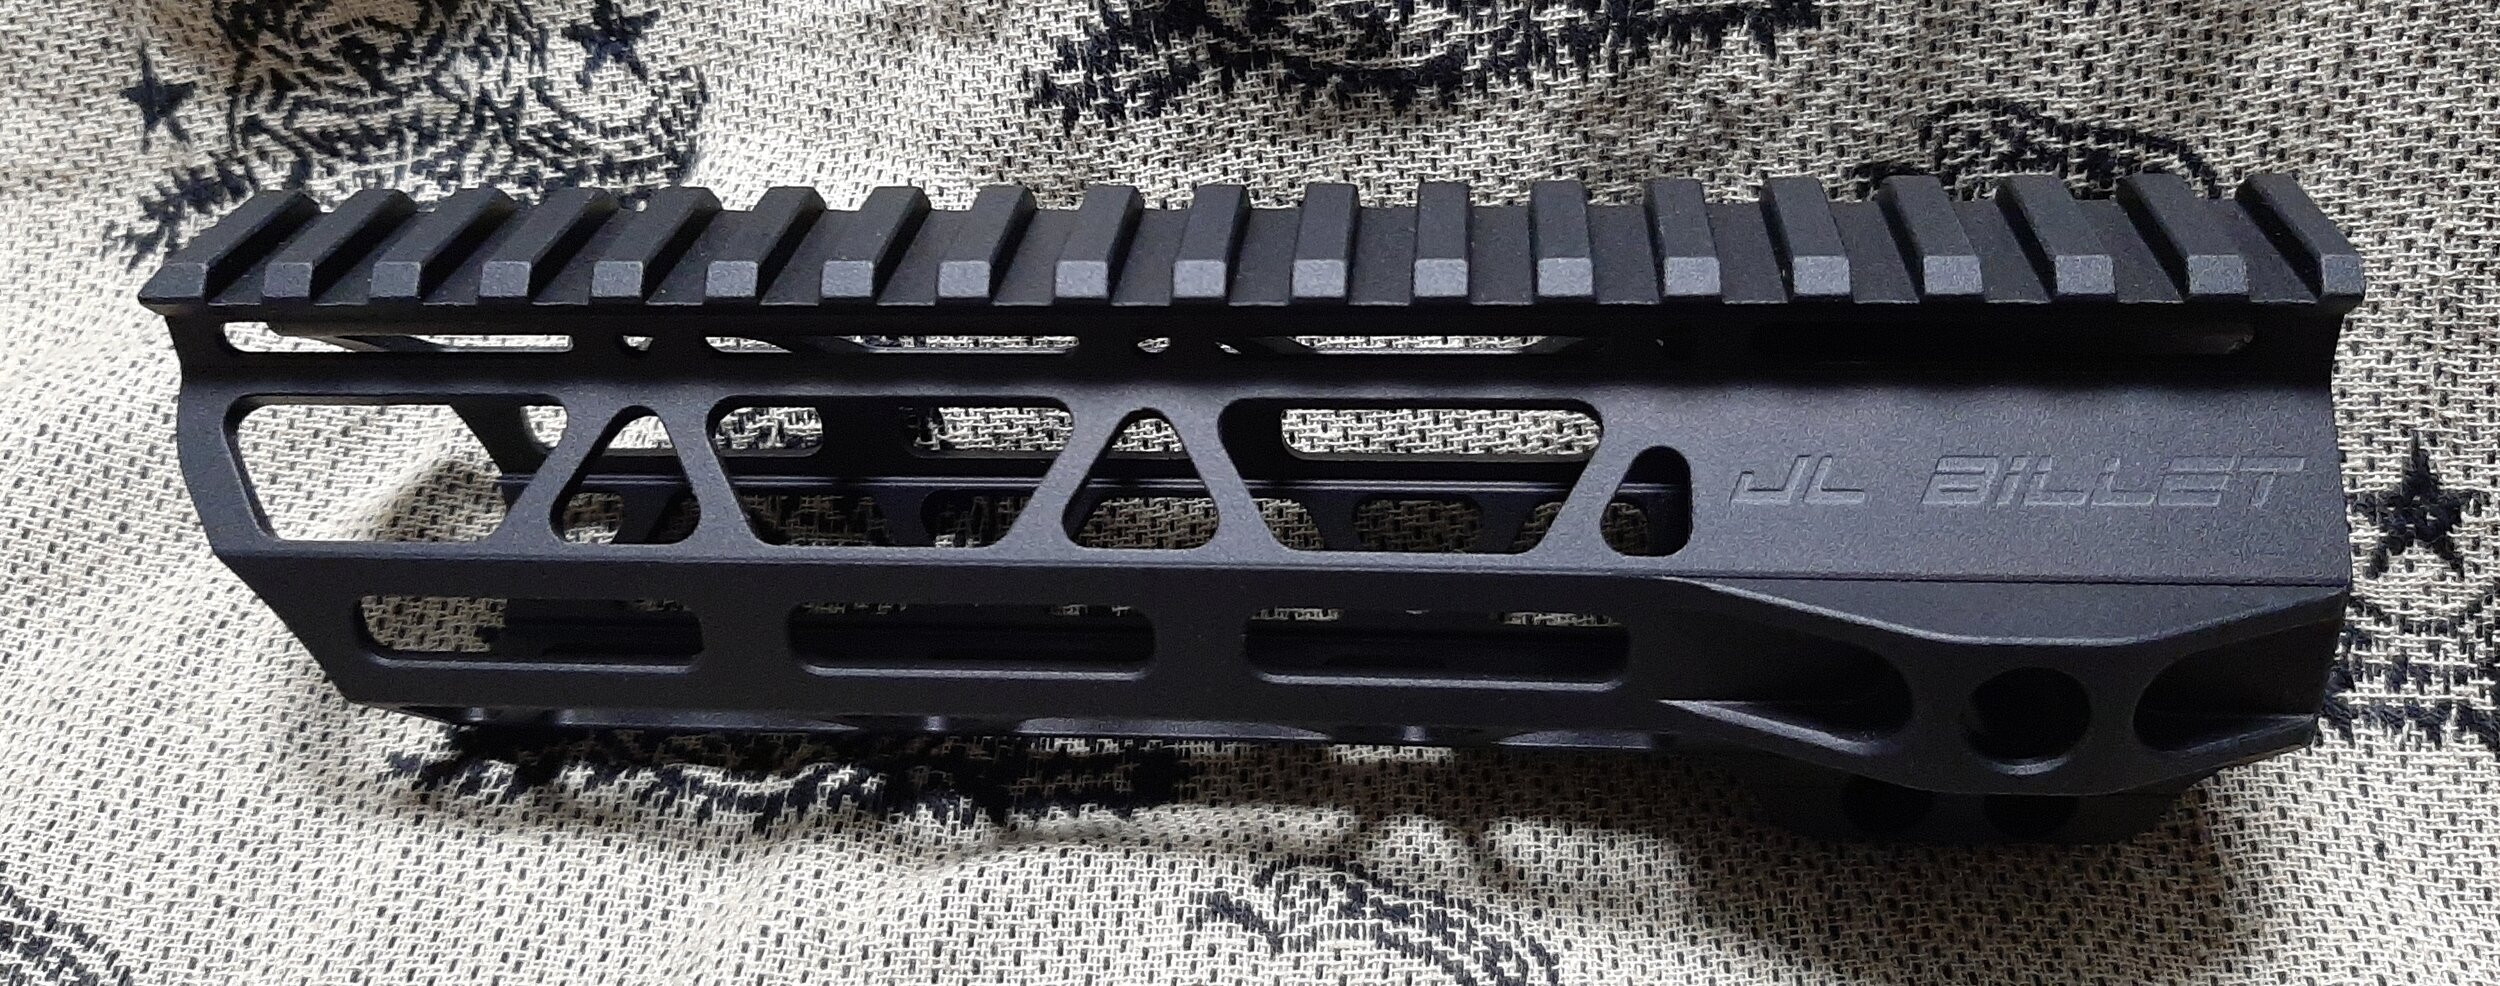 2 Pieces of Mlok 11 Slots 2 Pieces of Mlok 9 Slots Red Color GOTICAL Pack of 6-2 Pieces of Mlok 5 Slots 12 Screw and 12 Nuts with 3 Allen Wrench 